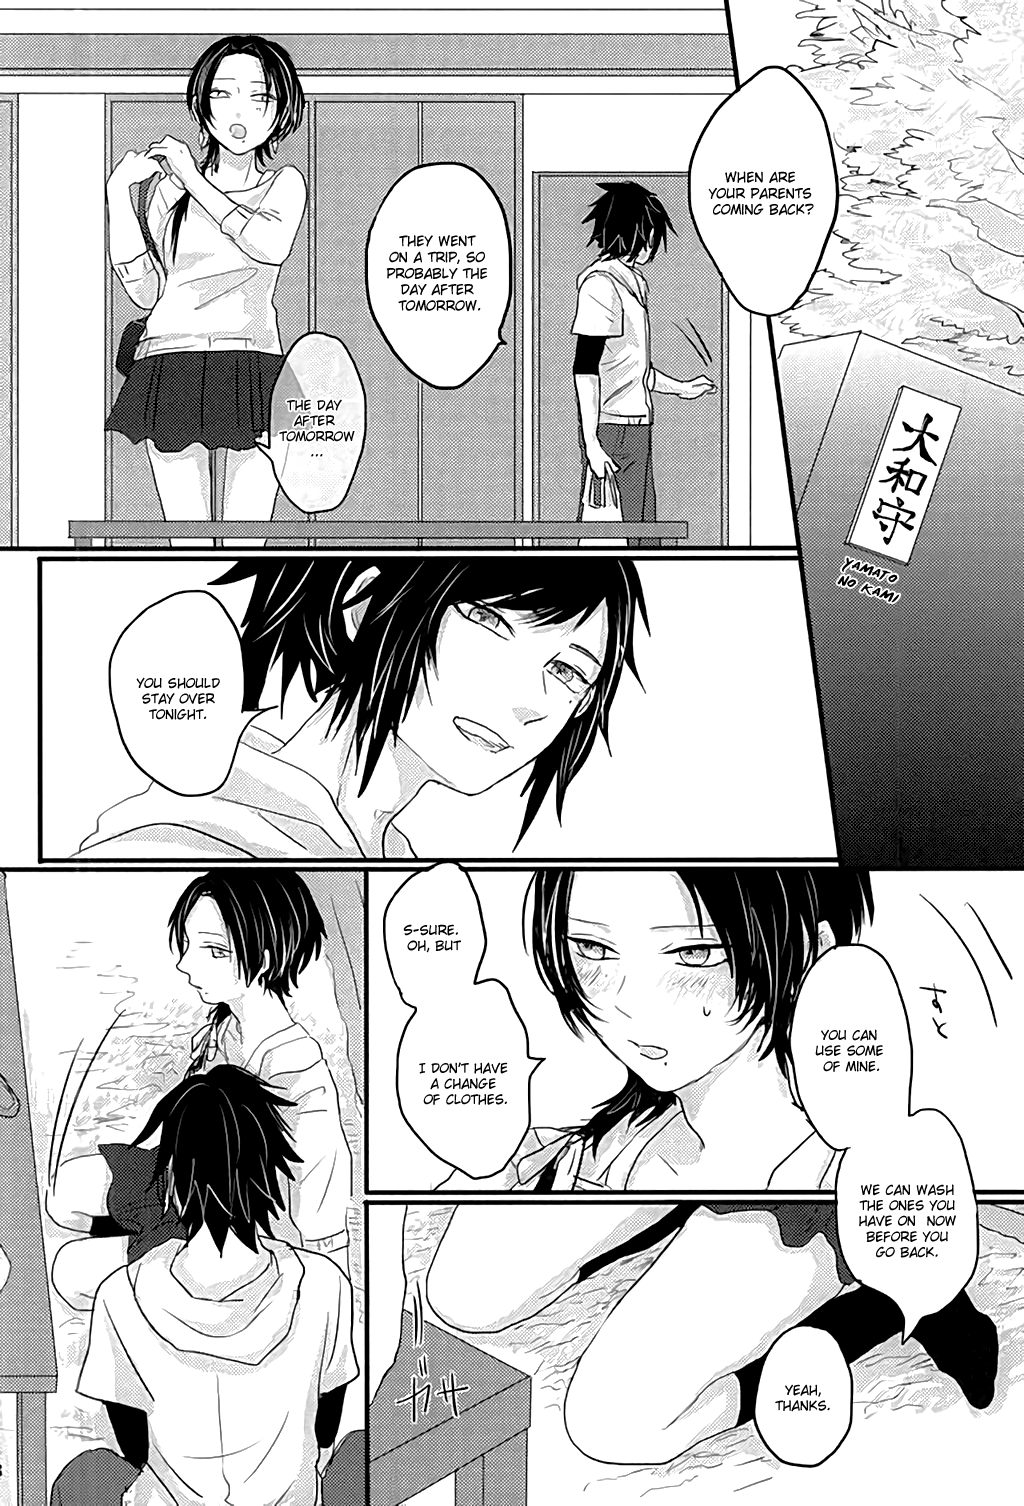 (SPARK10) [glowfly (JULLY)] After the strawberry (刀剣乱舞) [英訳]